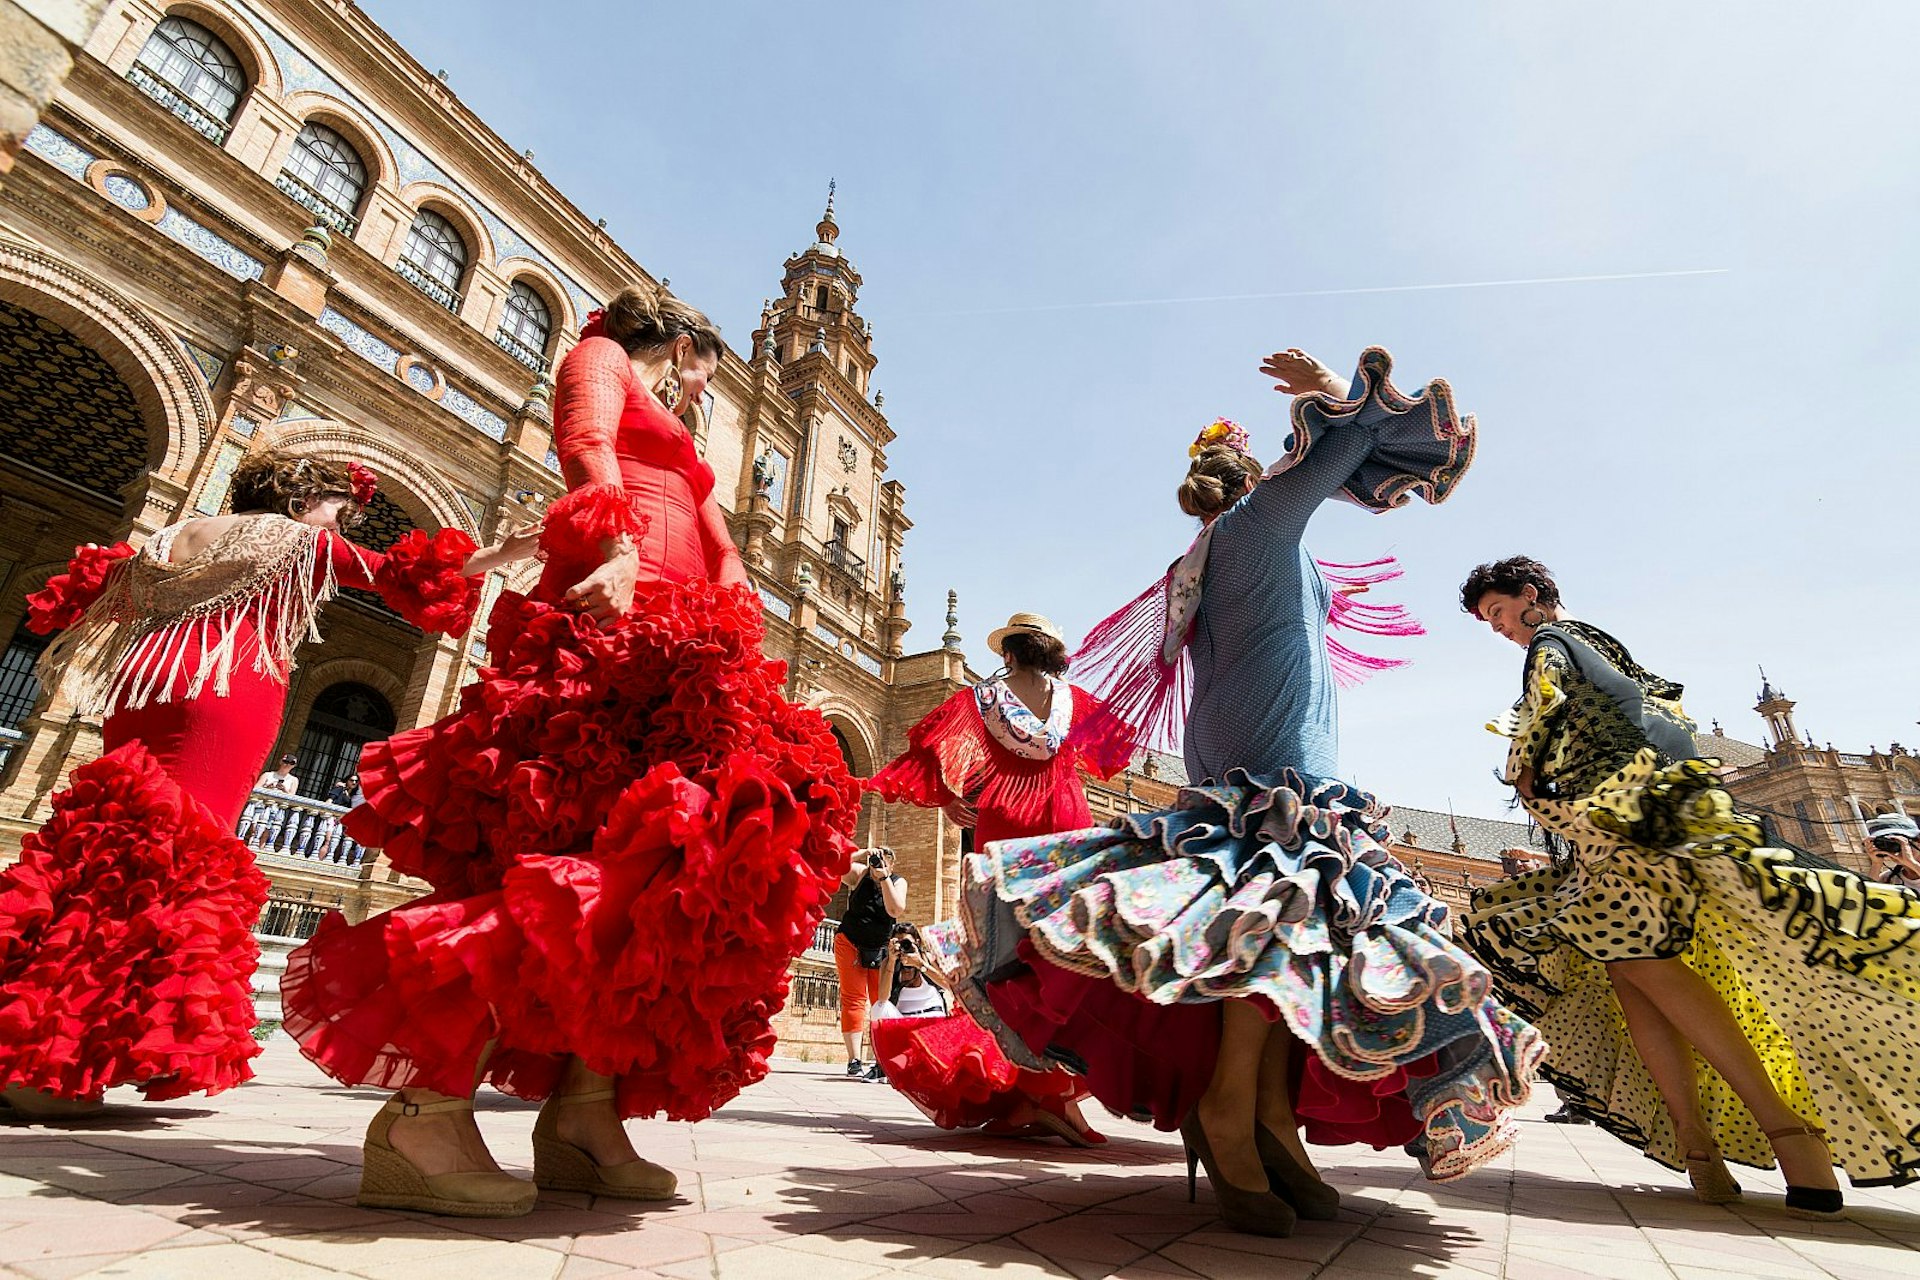 Women in brightly coloured dresses dancing the flamenco in front of the grand architecture of the the Plaza de España.